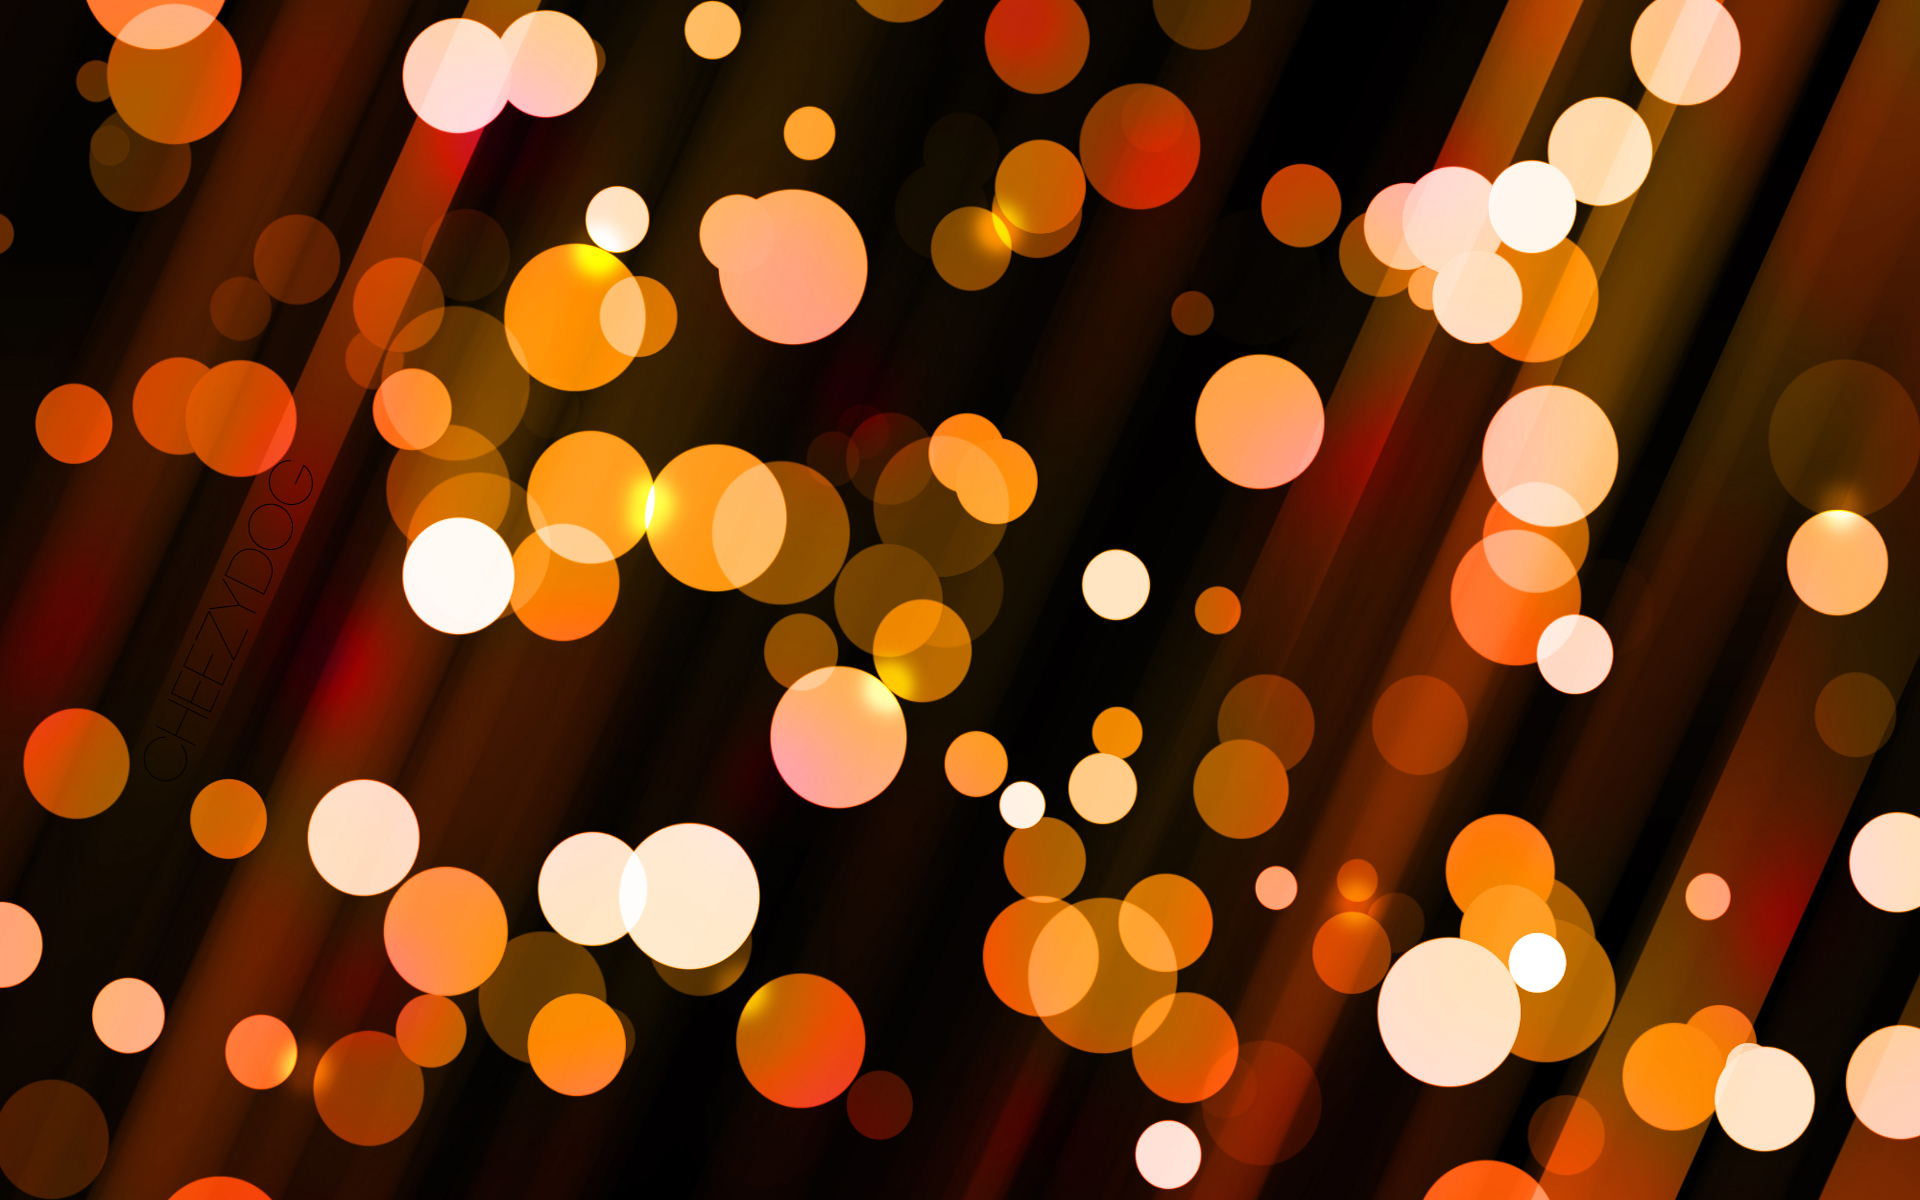 Abstract bokeh lights in various colors and sizes, creating a dreamy and unfocused effect.